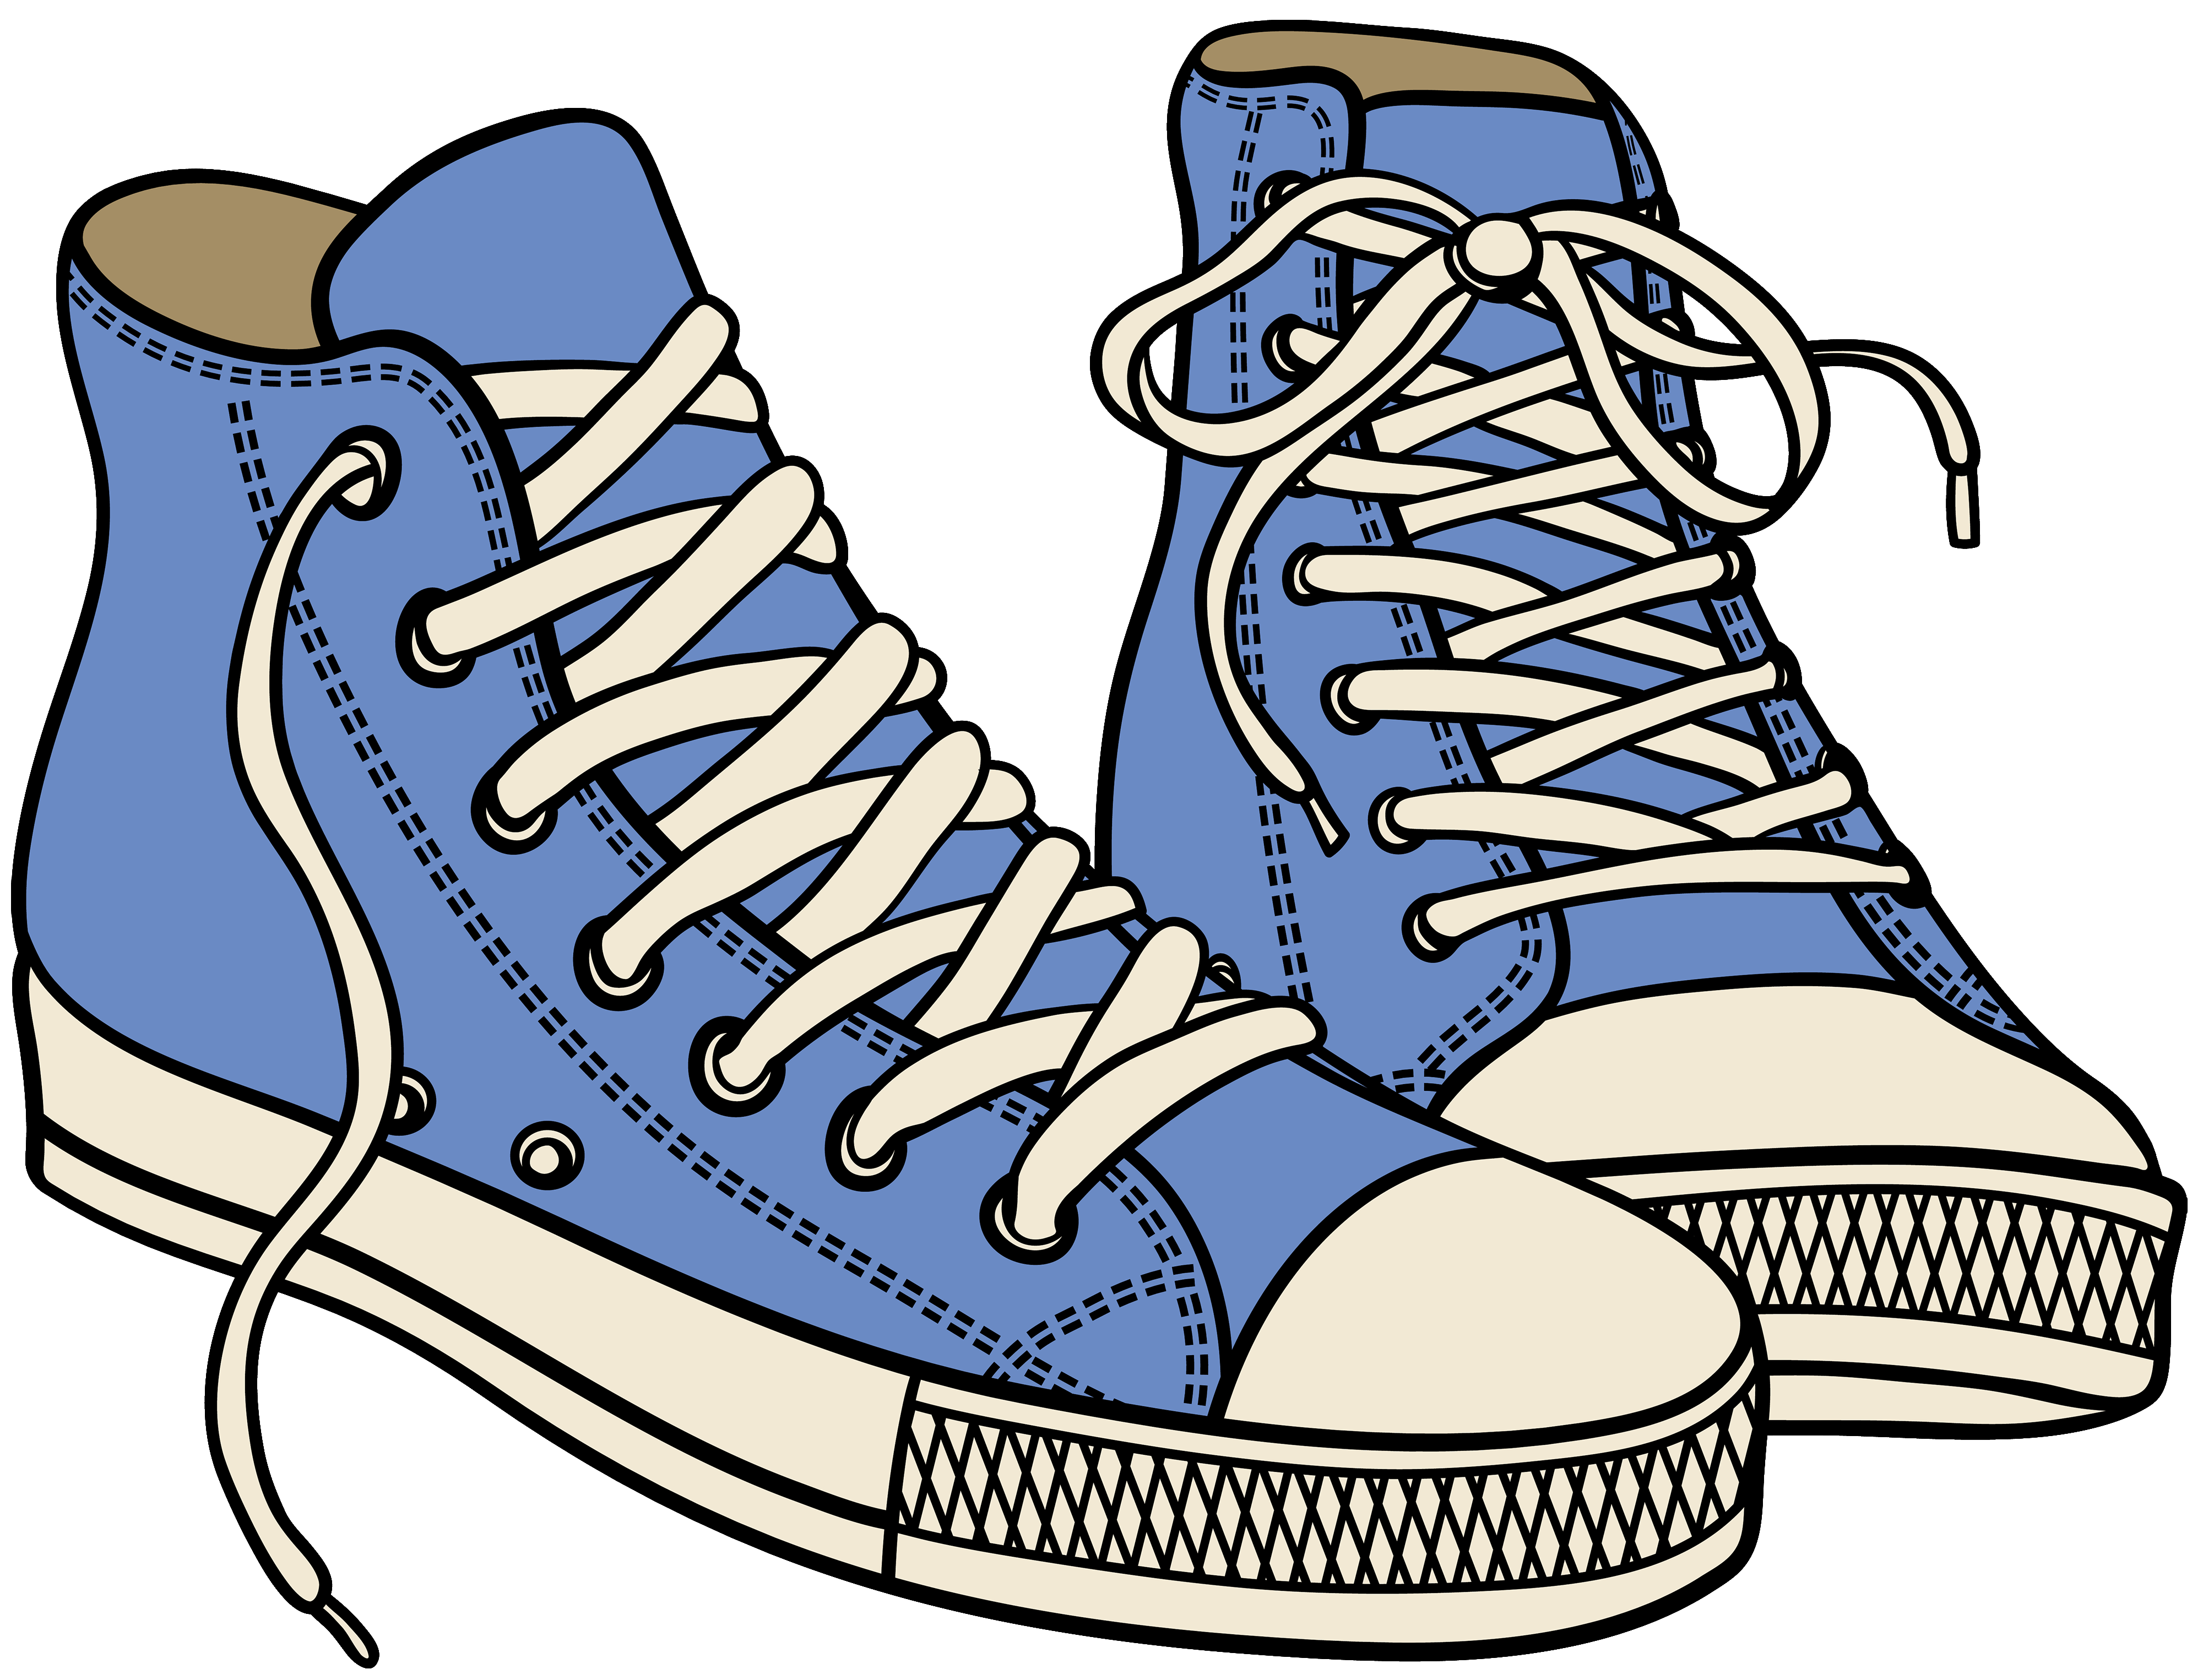 Blue High Sneakers PNG Clipart - Best WEB Clipart